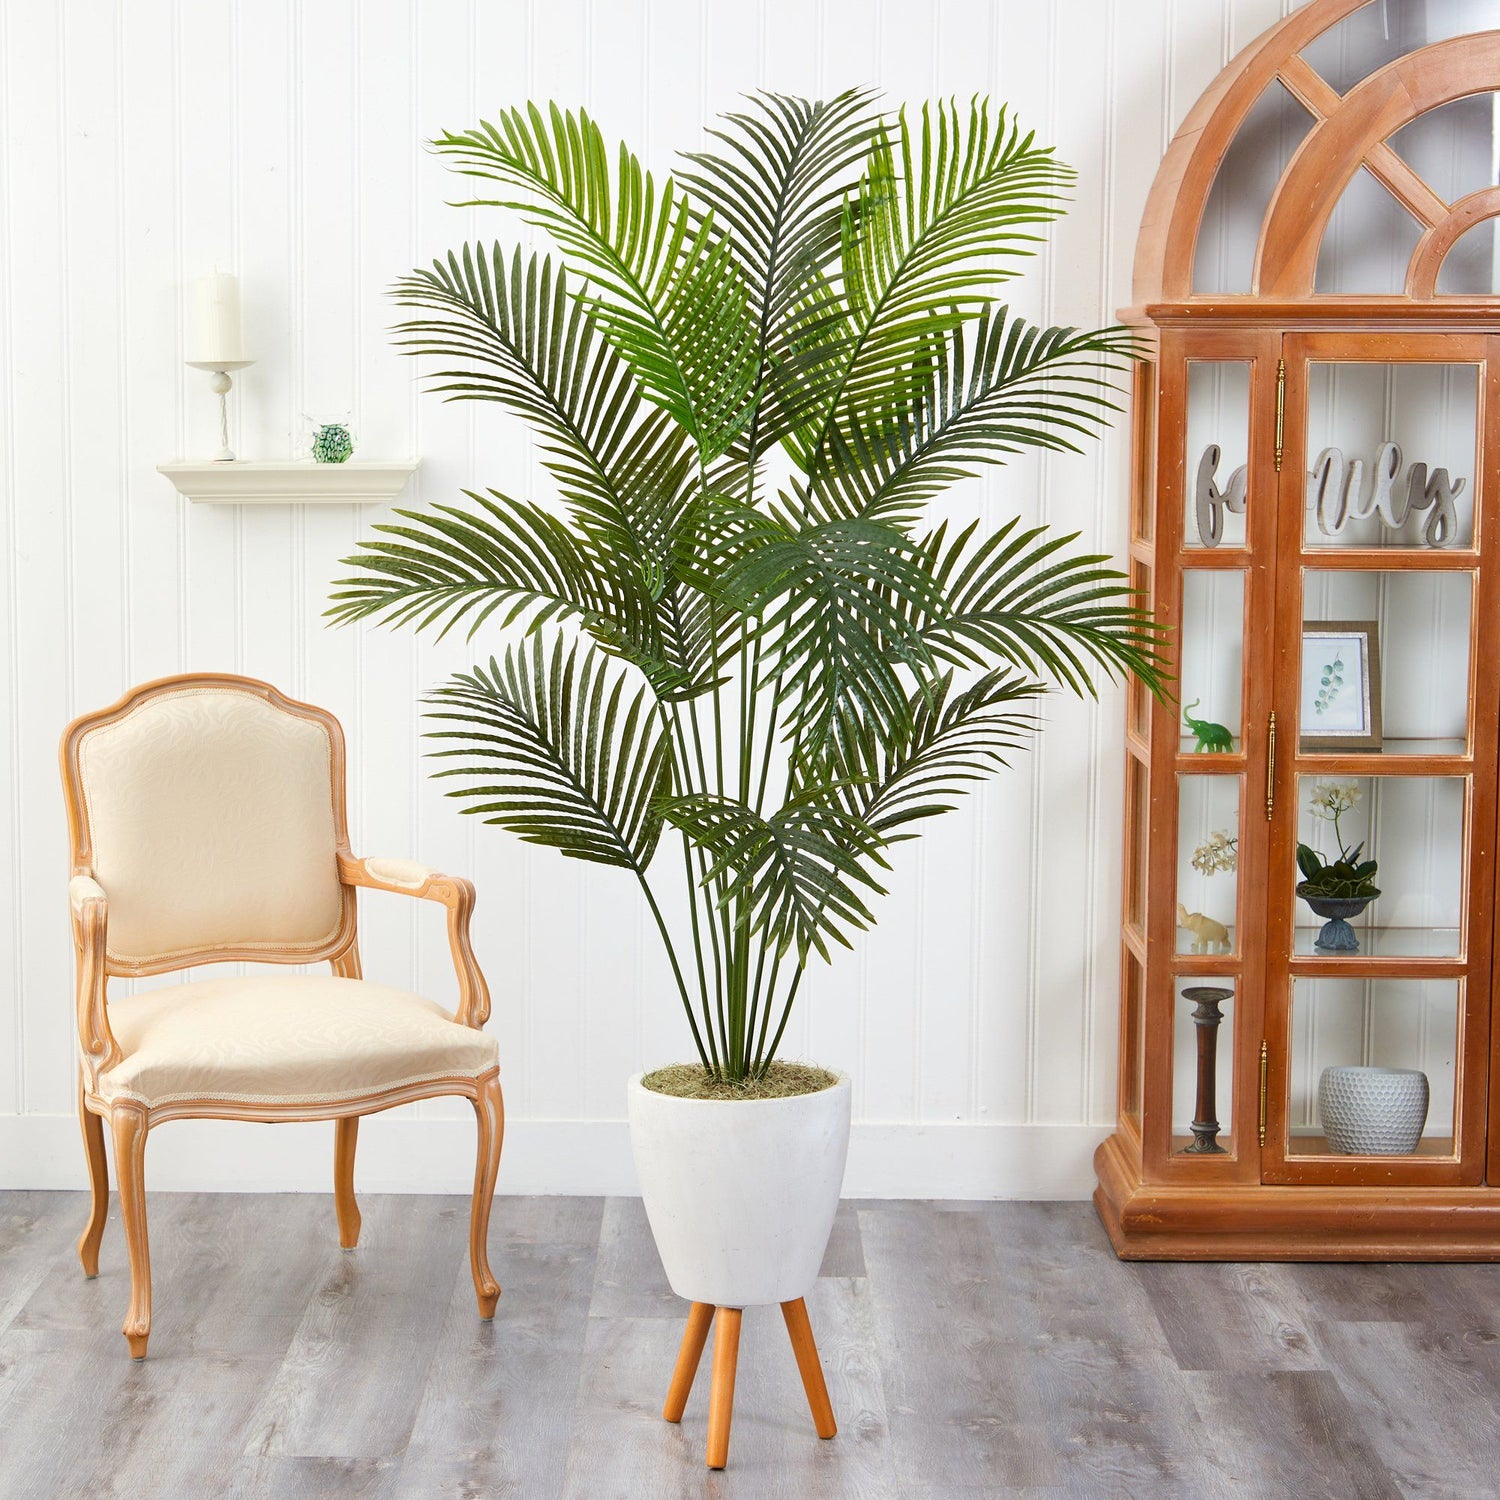 6.5’ Golden Cane Artificial Palm Tree in White Planter with Stand